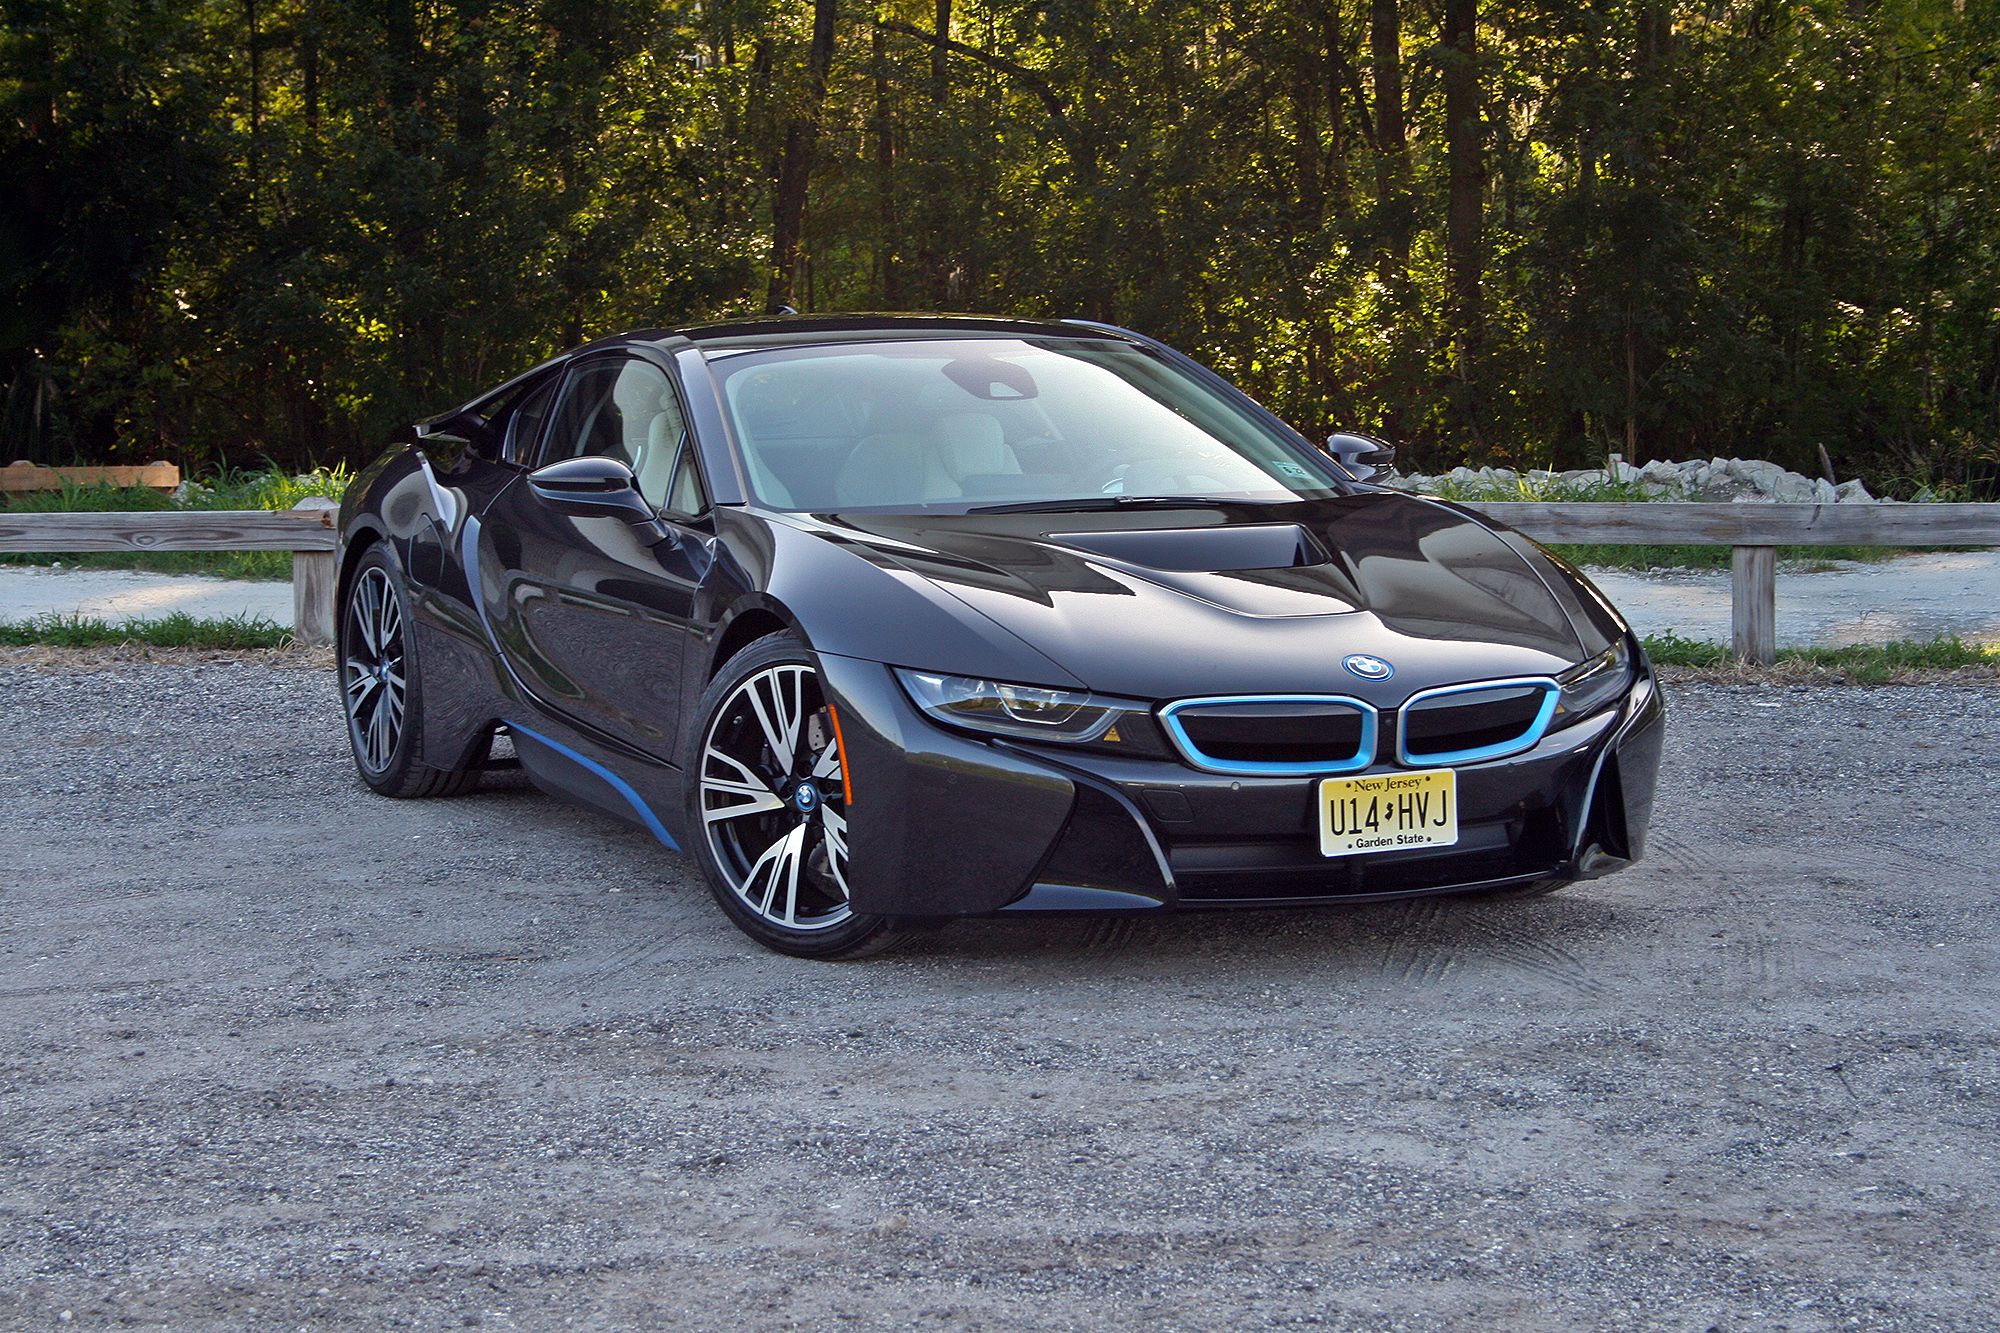 The Bmw I8 Makes Me Feel Old